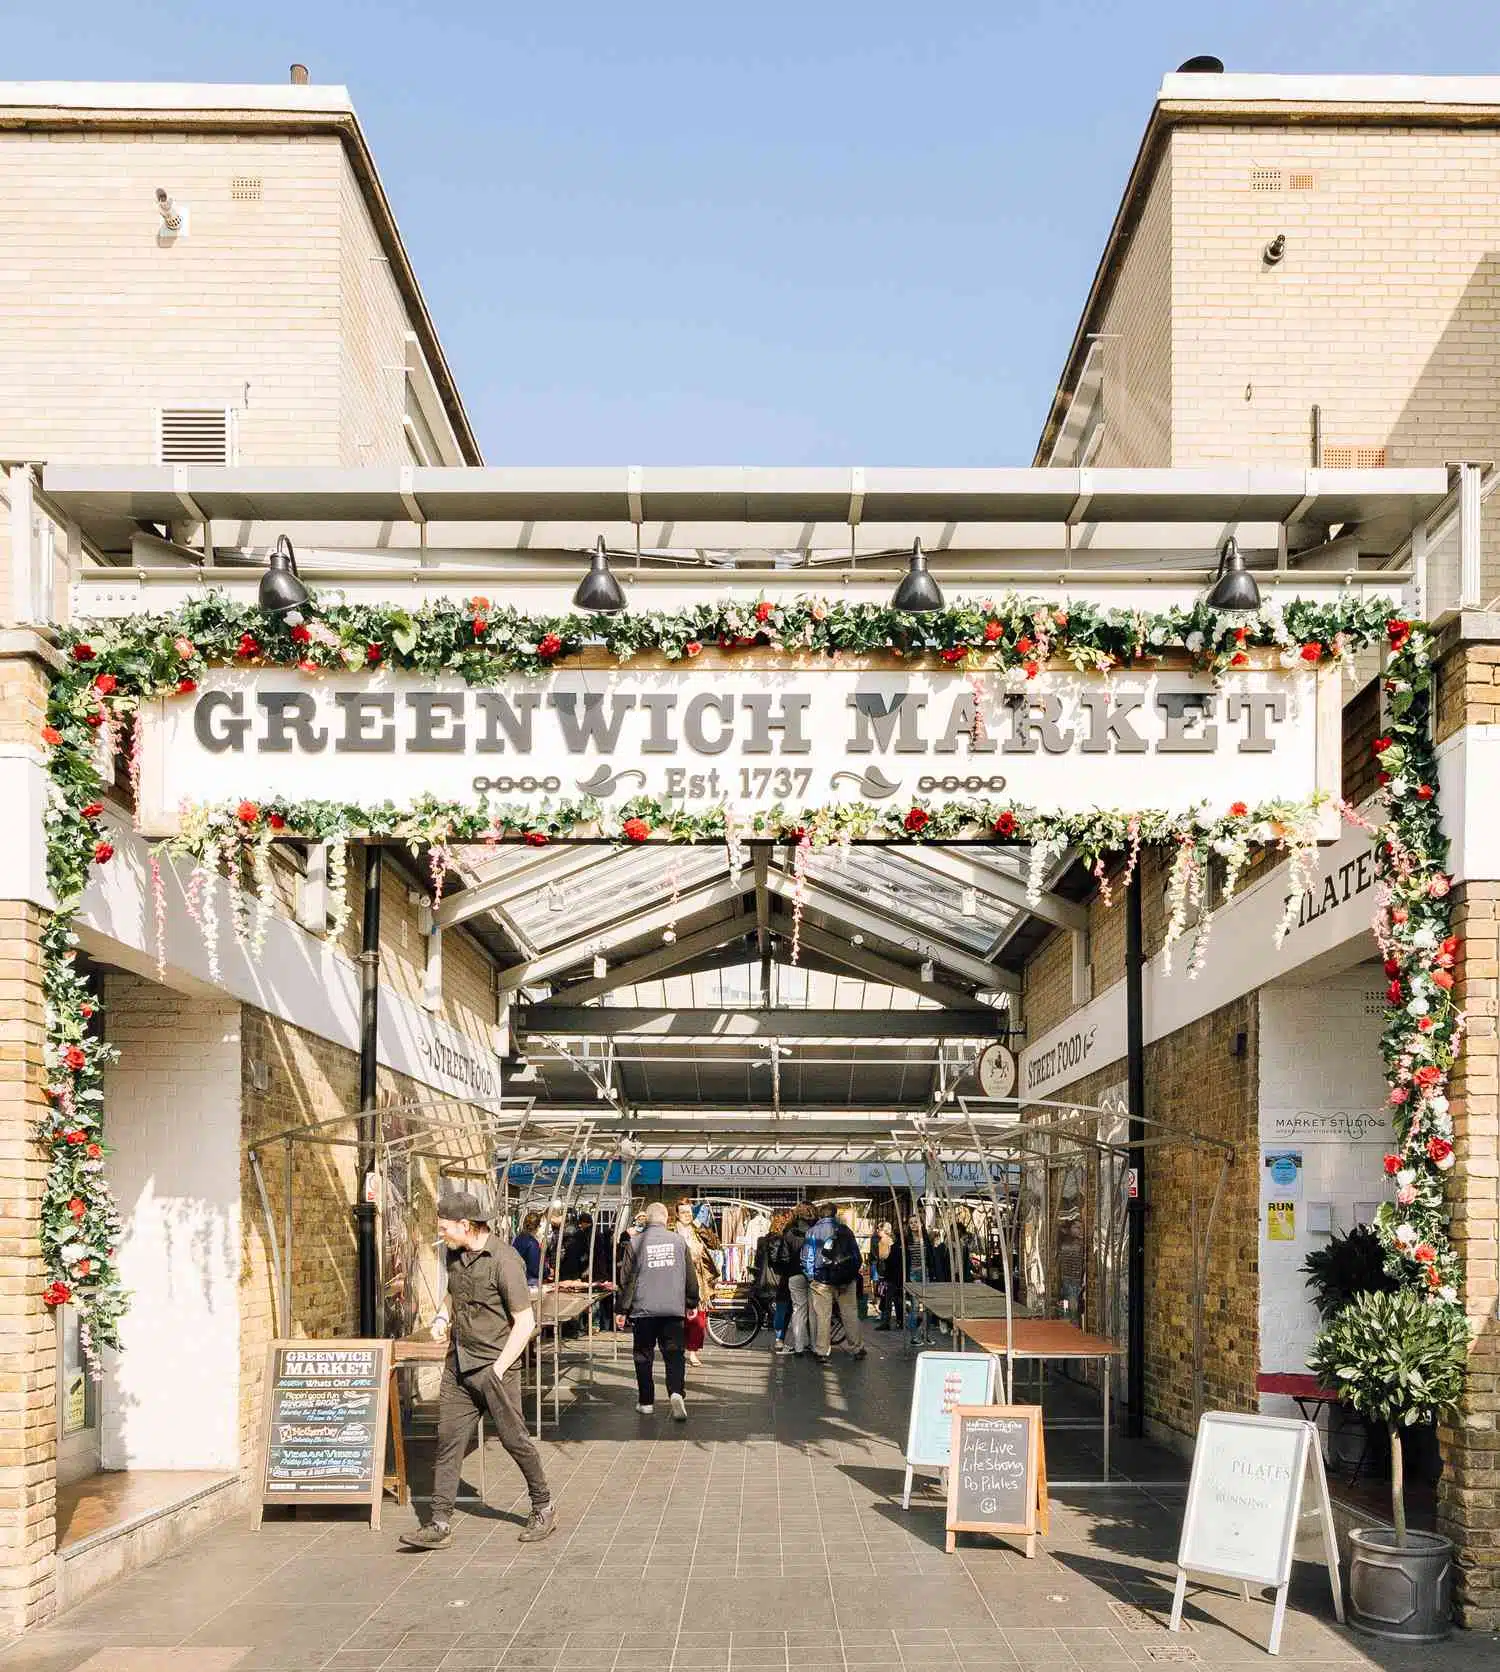 Entrance to the traditional covered Greenwich Market in London